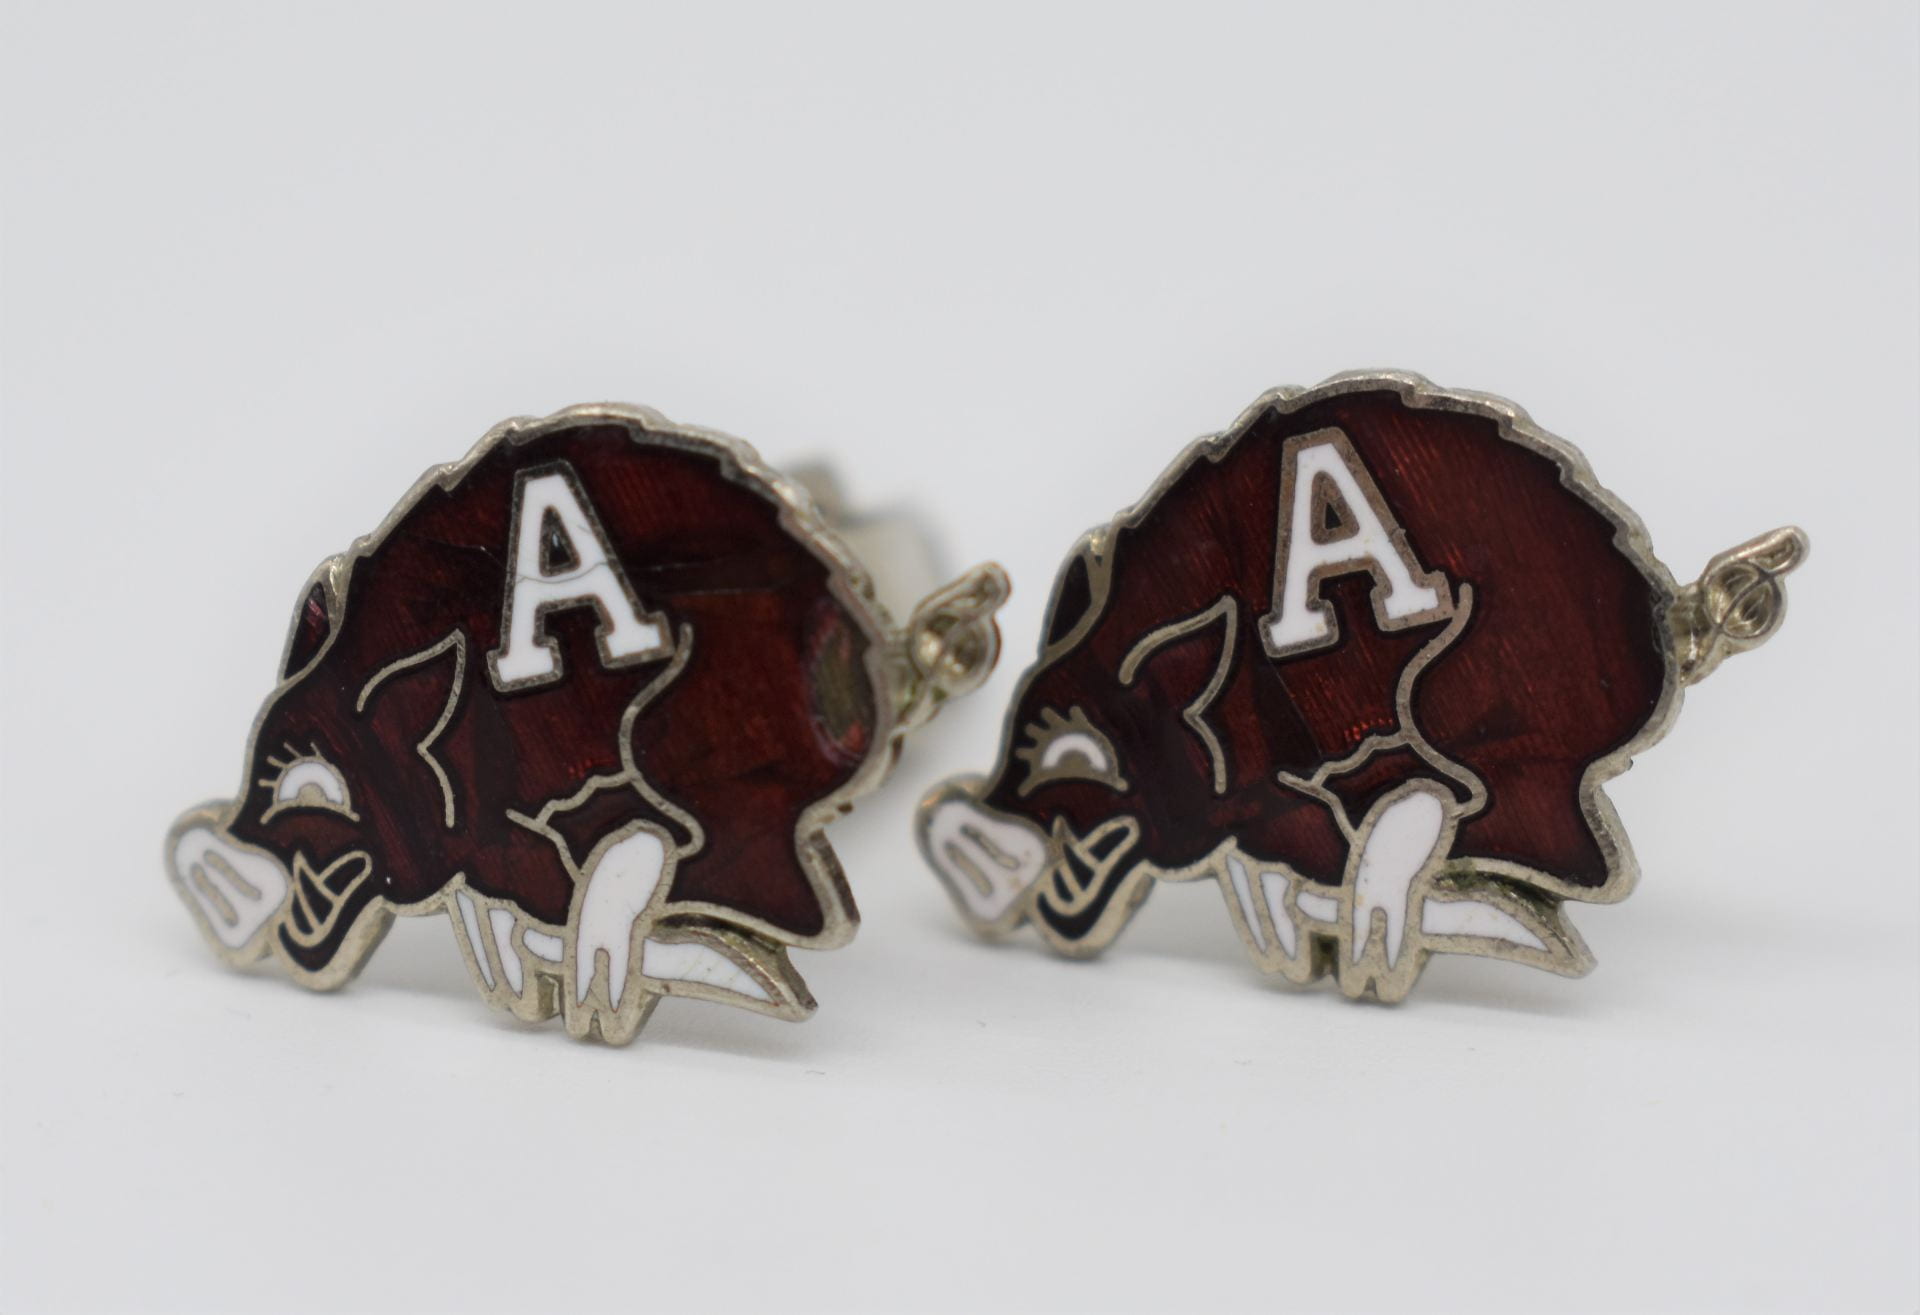 A pair of metal cufflinks in the shape of red Razorbacks with the letter "A" at the center.